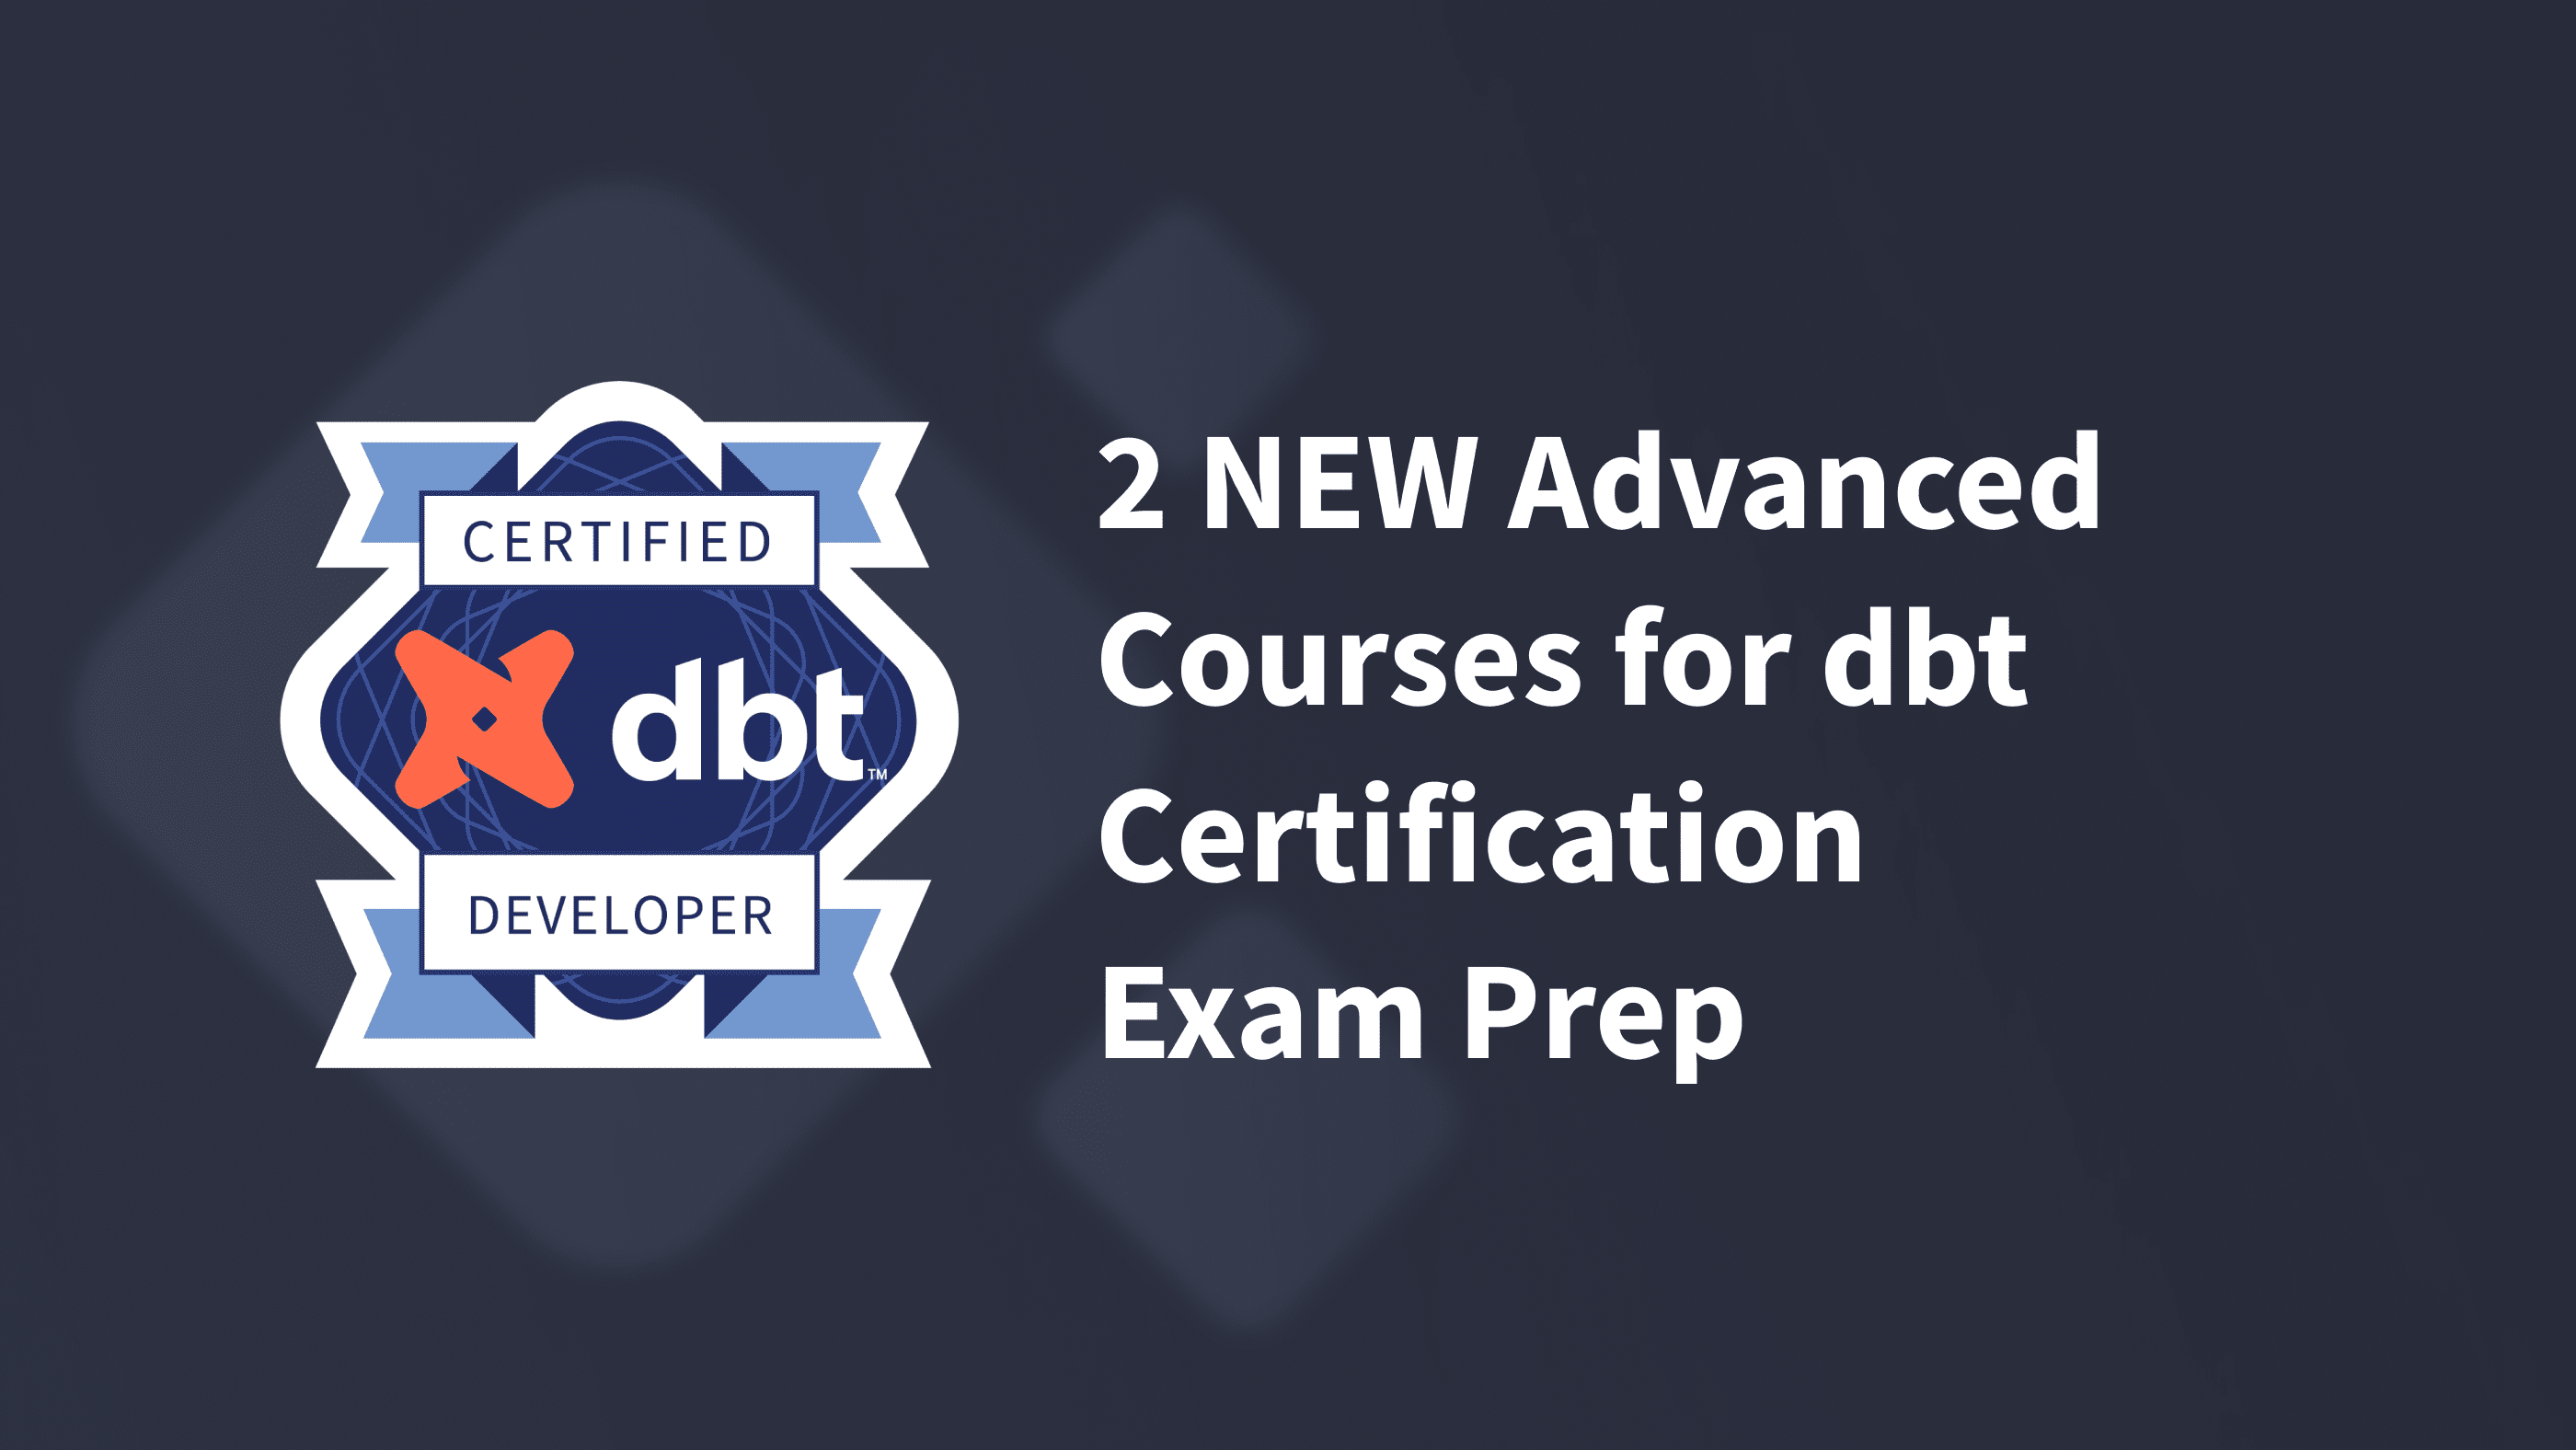 Introducing 2 NEW dbt Learn advanced courses to help you prepare for the dbt Certification Exam